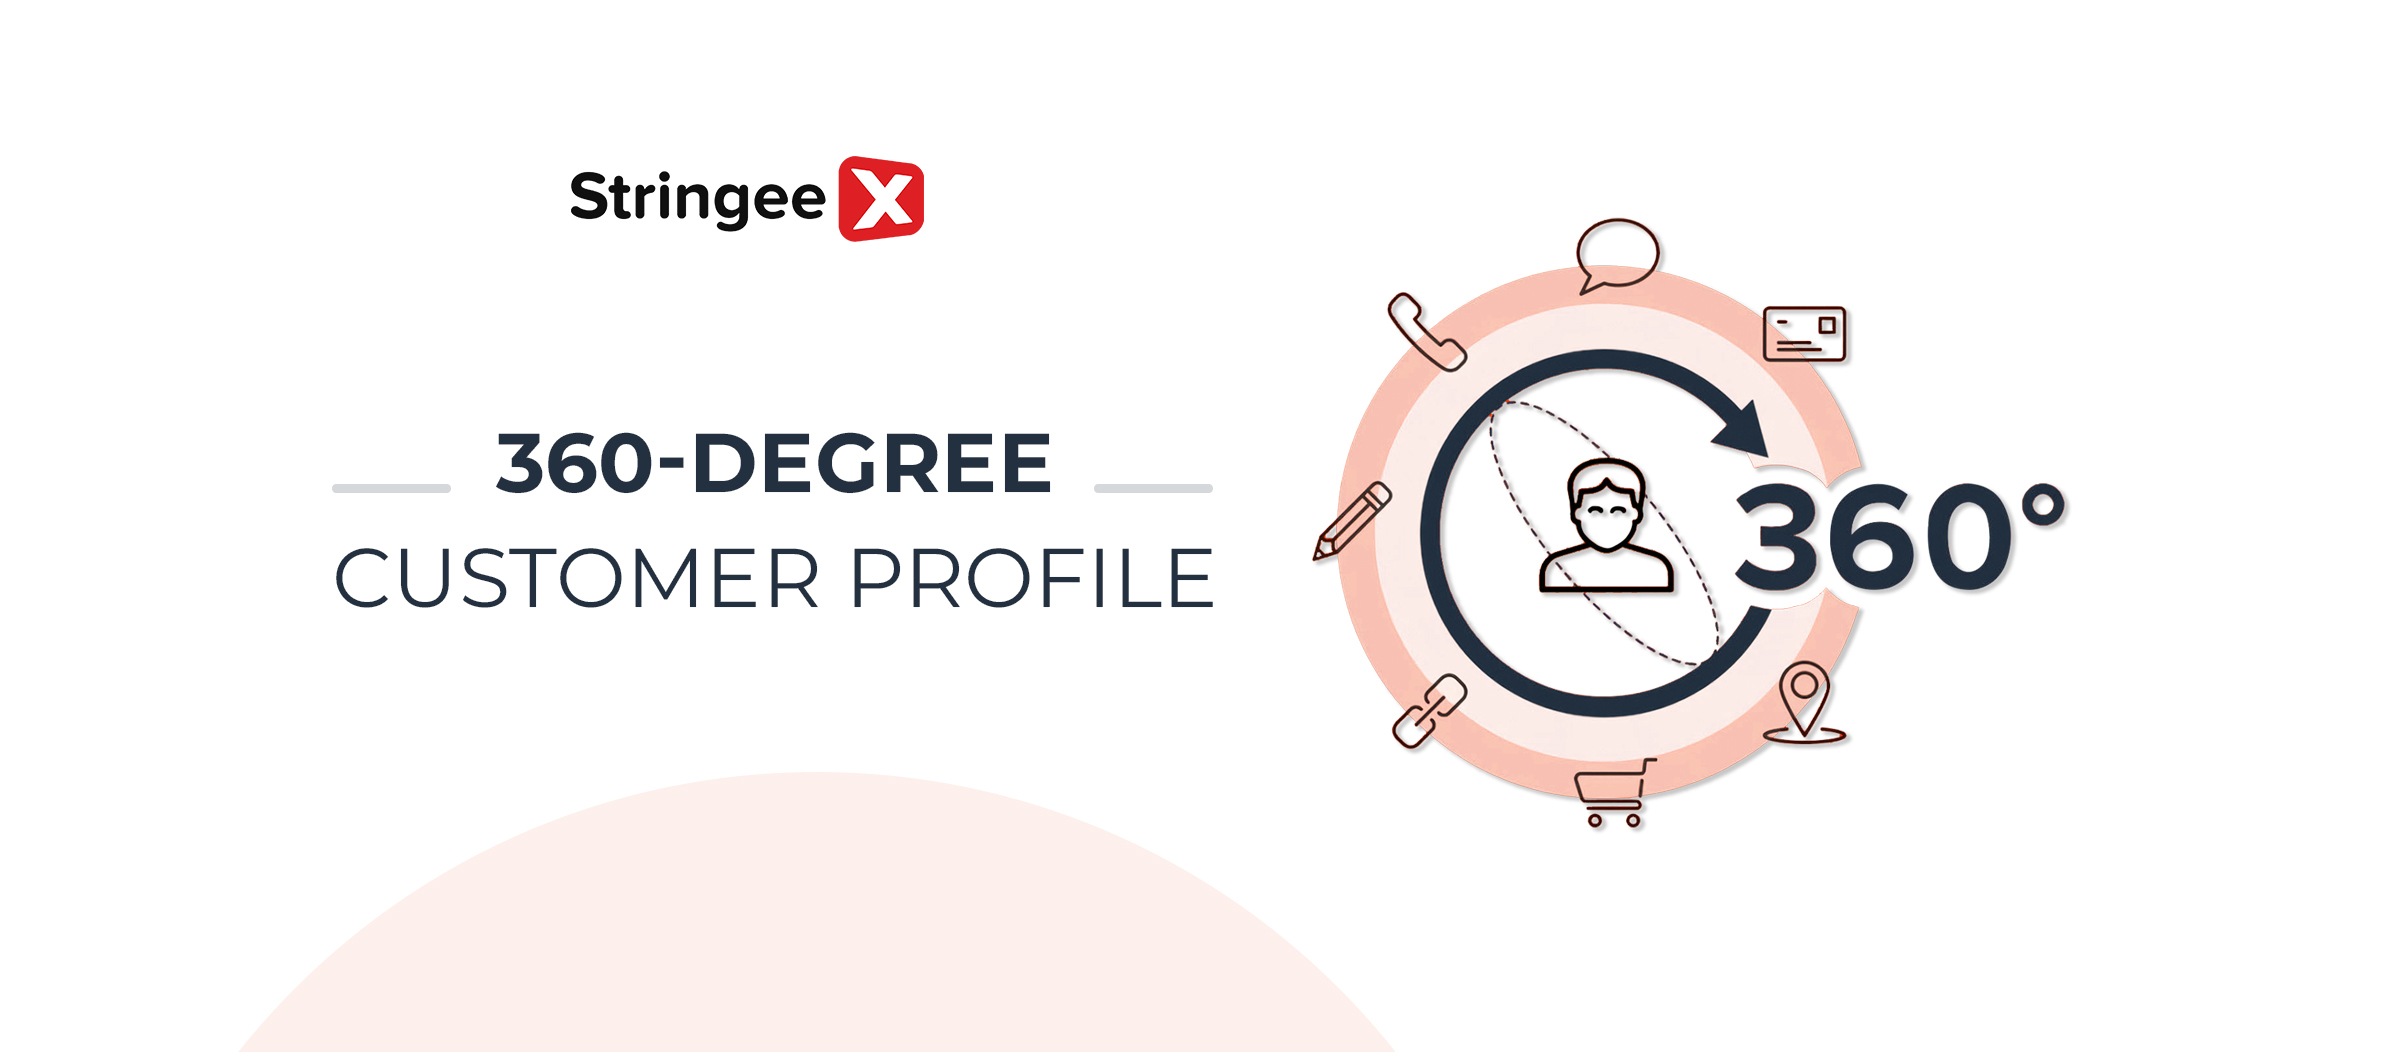 What is a 360-degree customer profile? Instructions for building a 360-degree customer profile